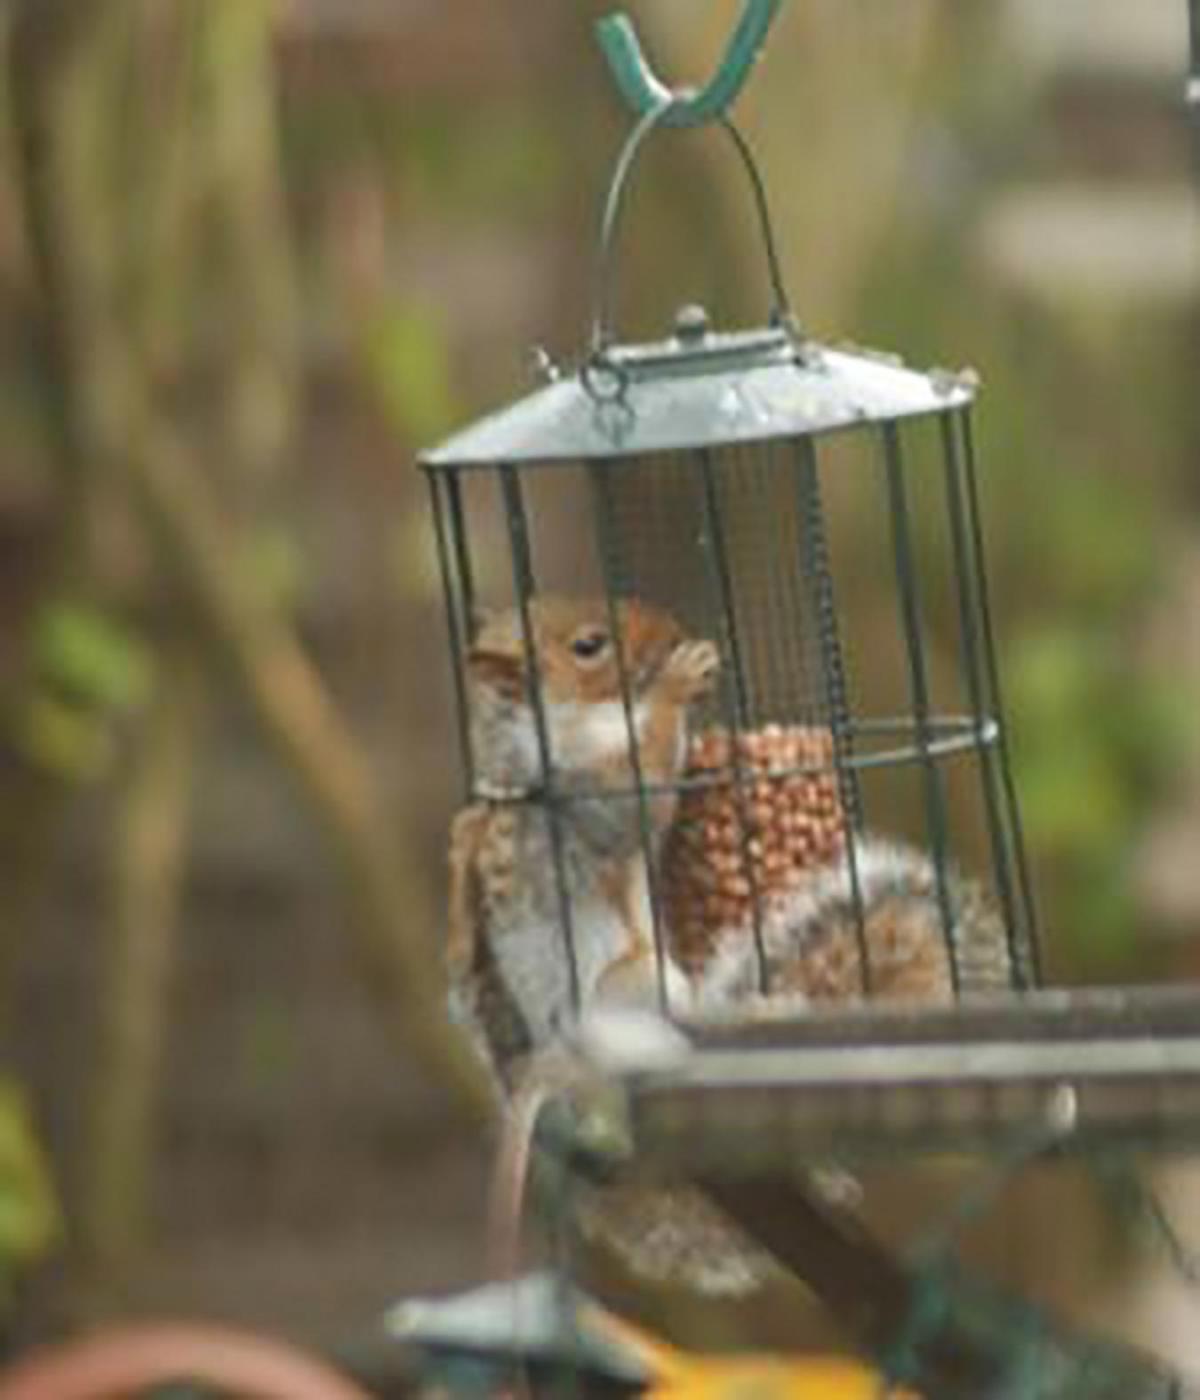 February 2015      Rob McColl
: Crafty squirrel
Who said that the feeder was squirrell proof?